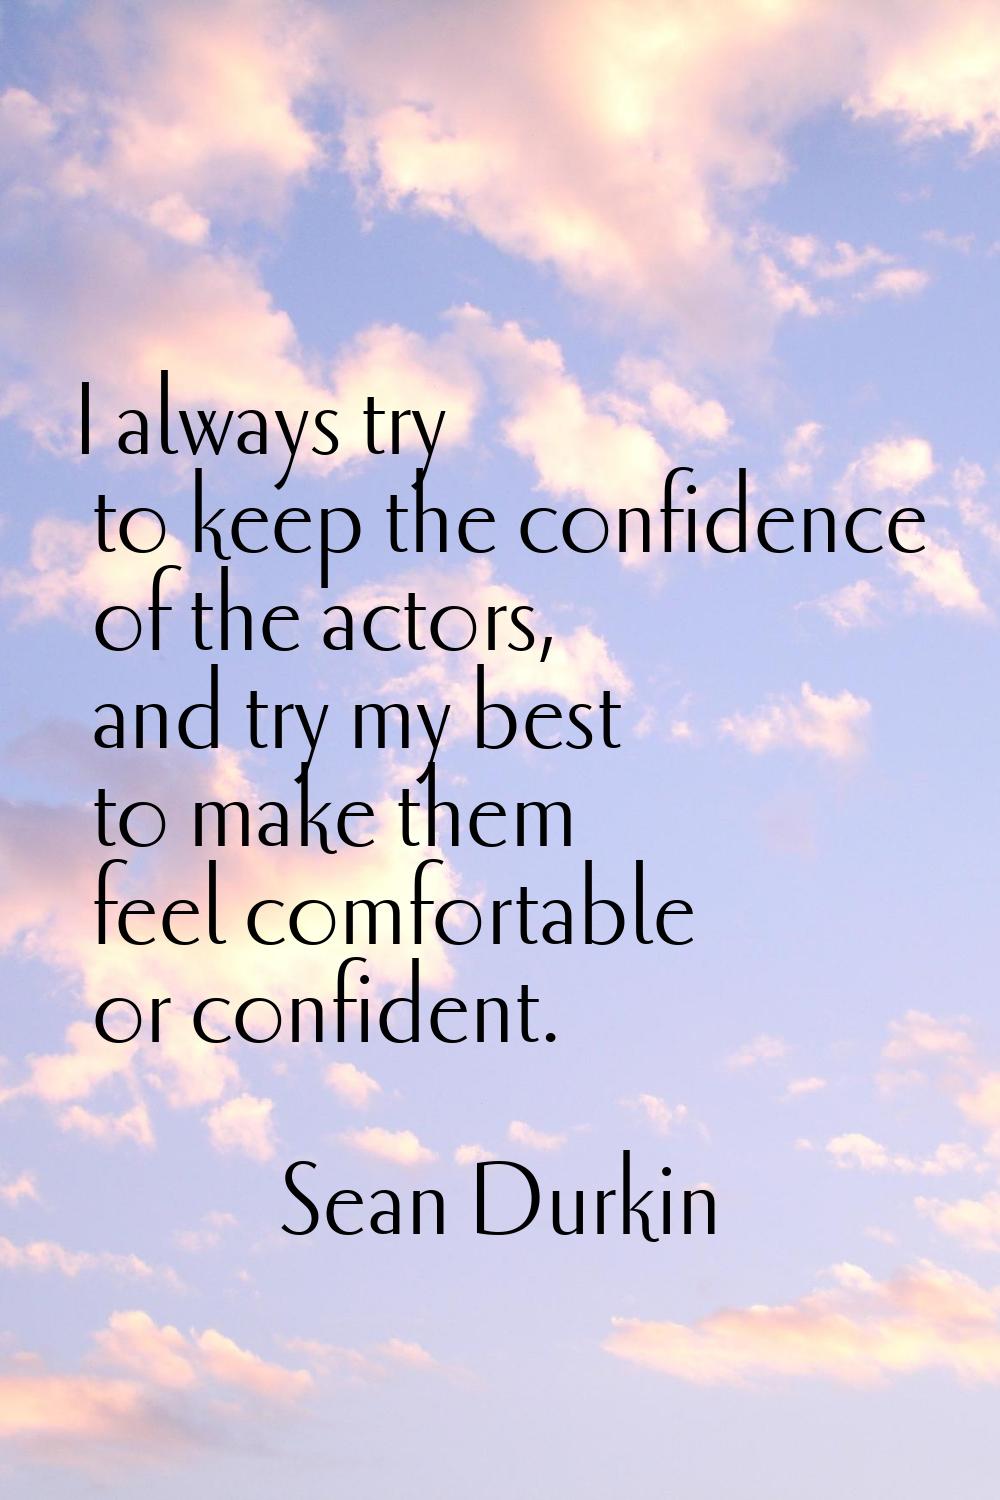 I always try to keep the confidence of the actors, and try my best to make them feel comfortable or